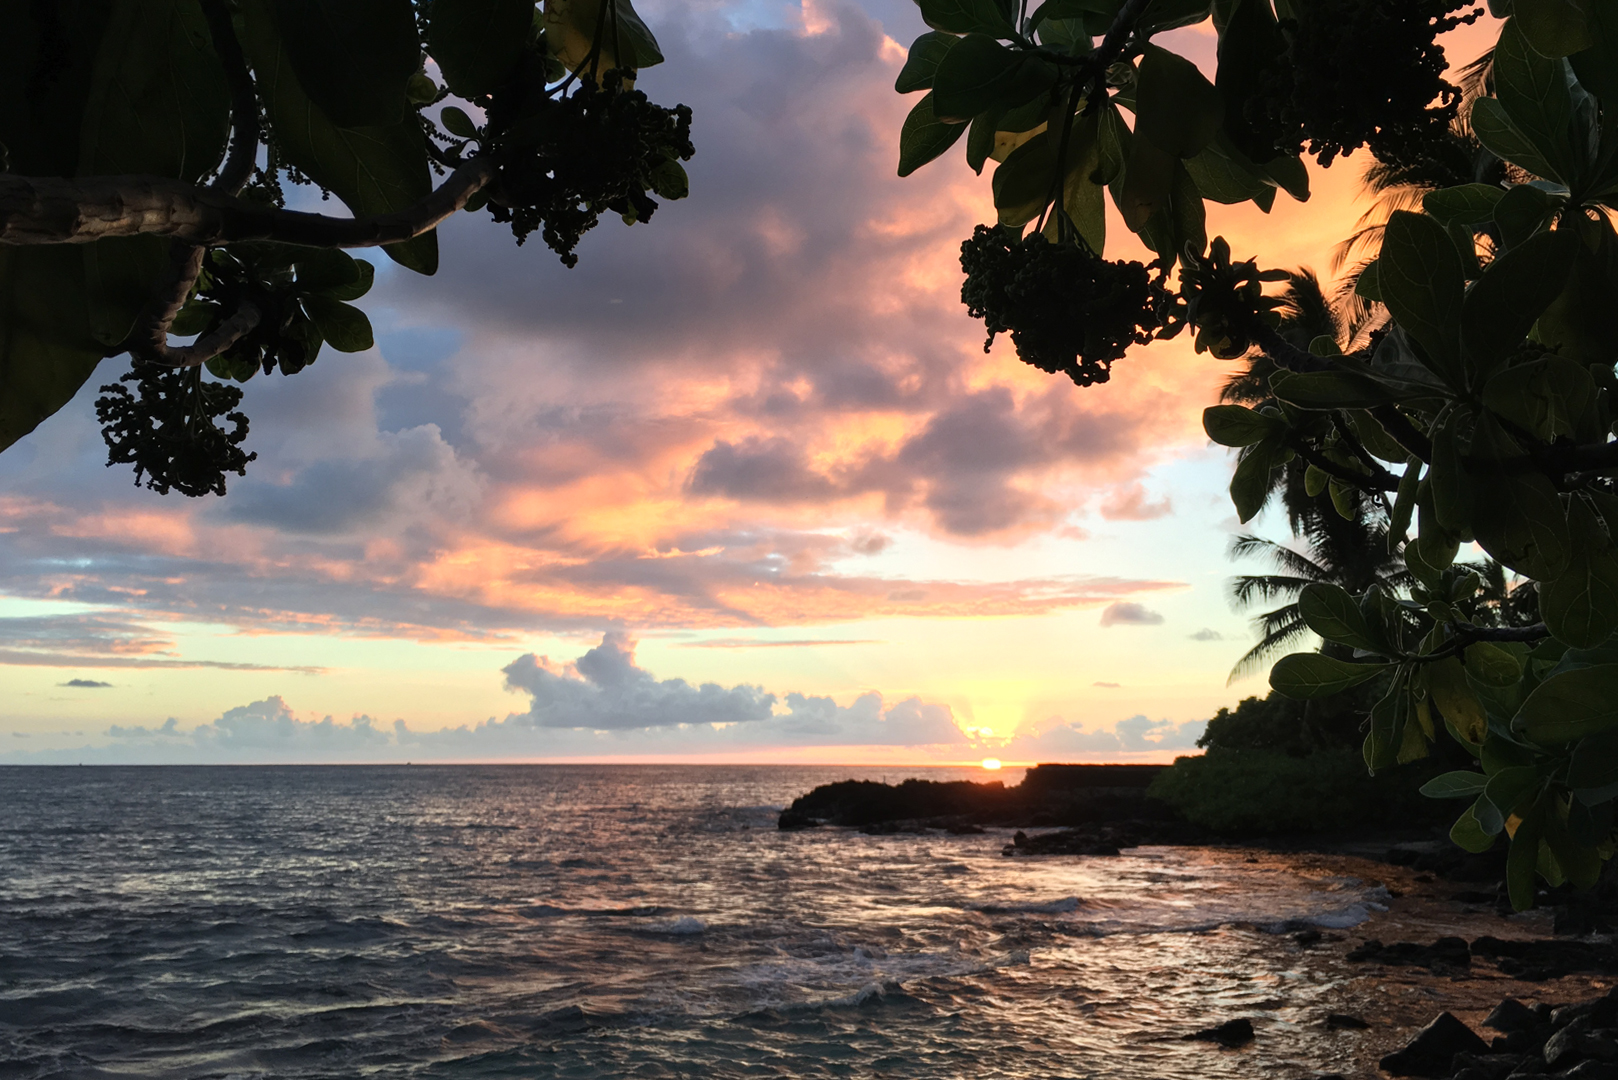 A view of a Holualoa bay sunset taken from in front of the house